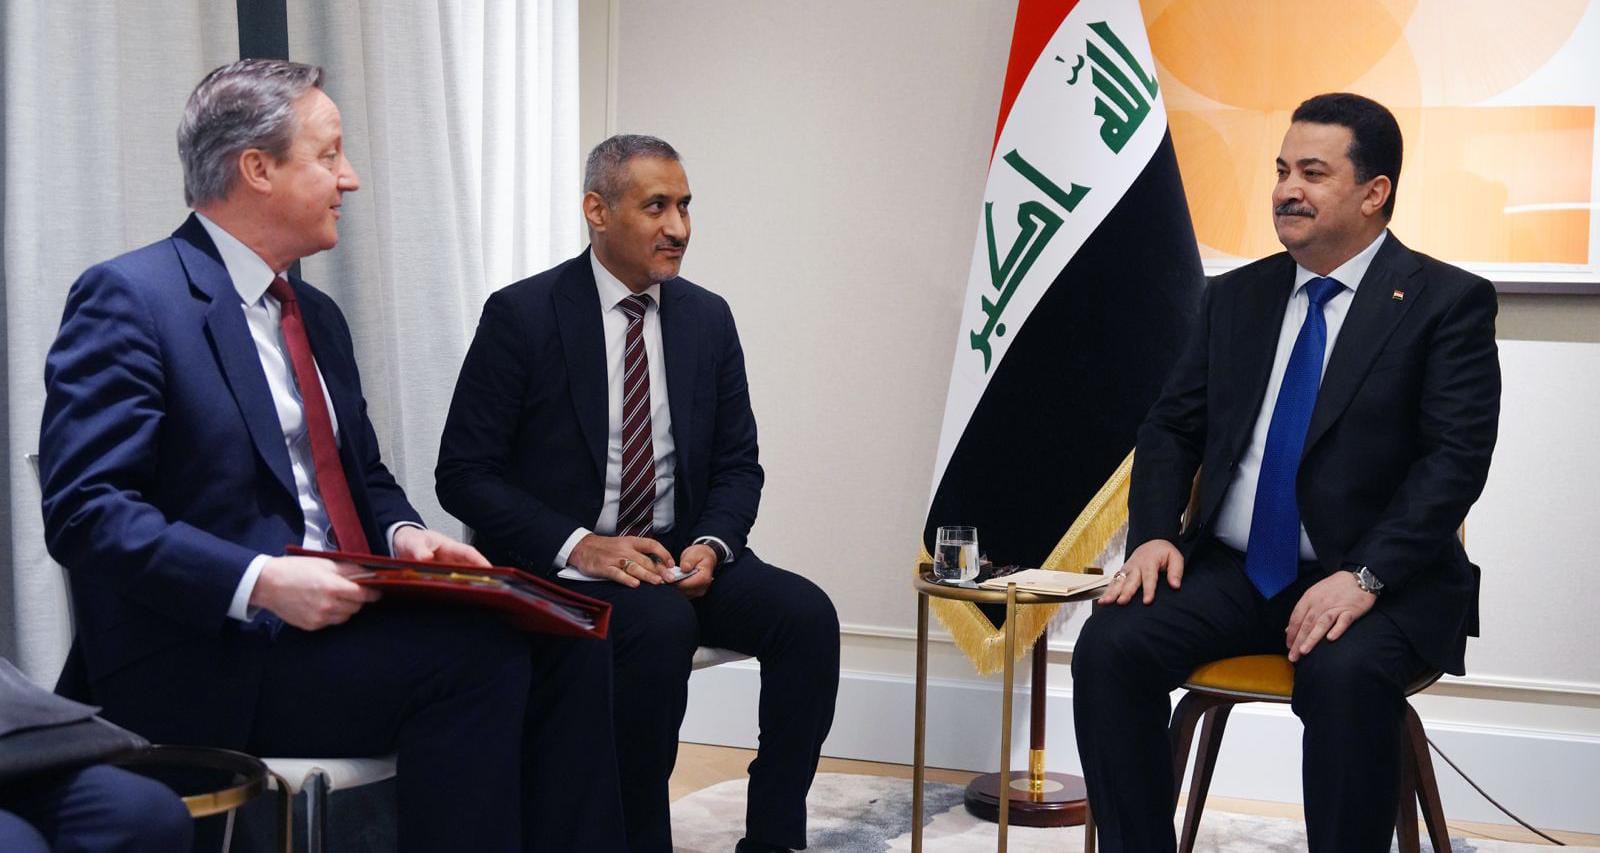 Iraqi PM welcomes British investment, meets UK Foreign Minister